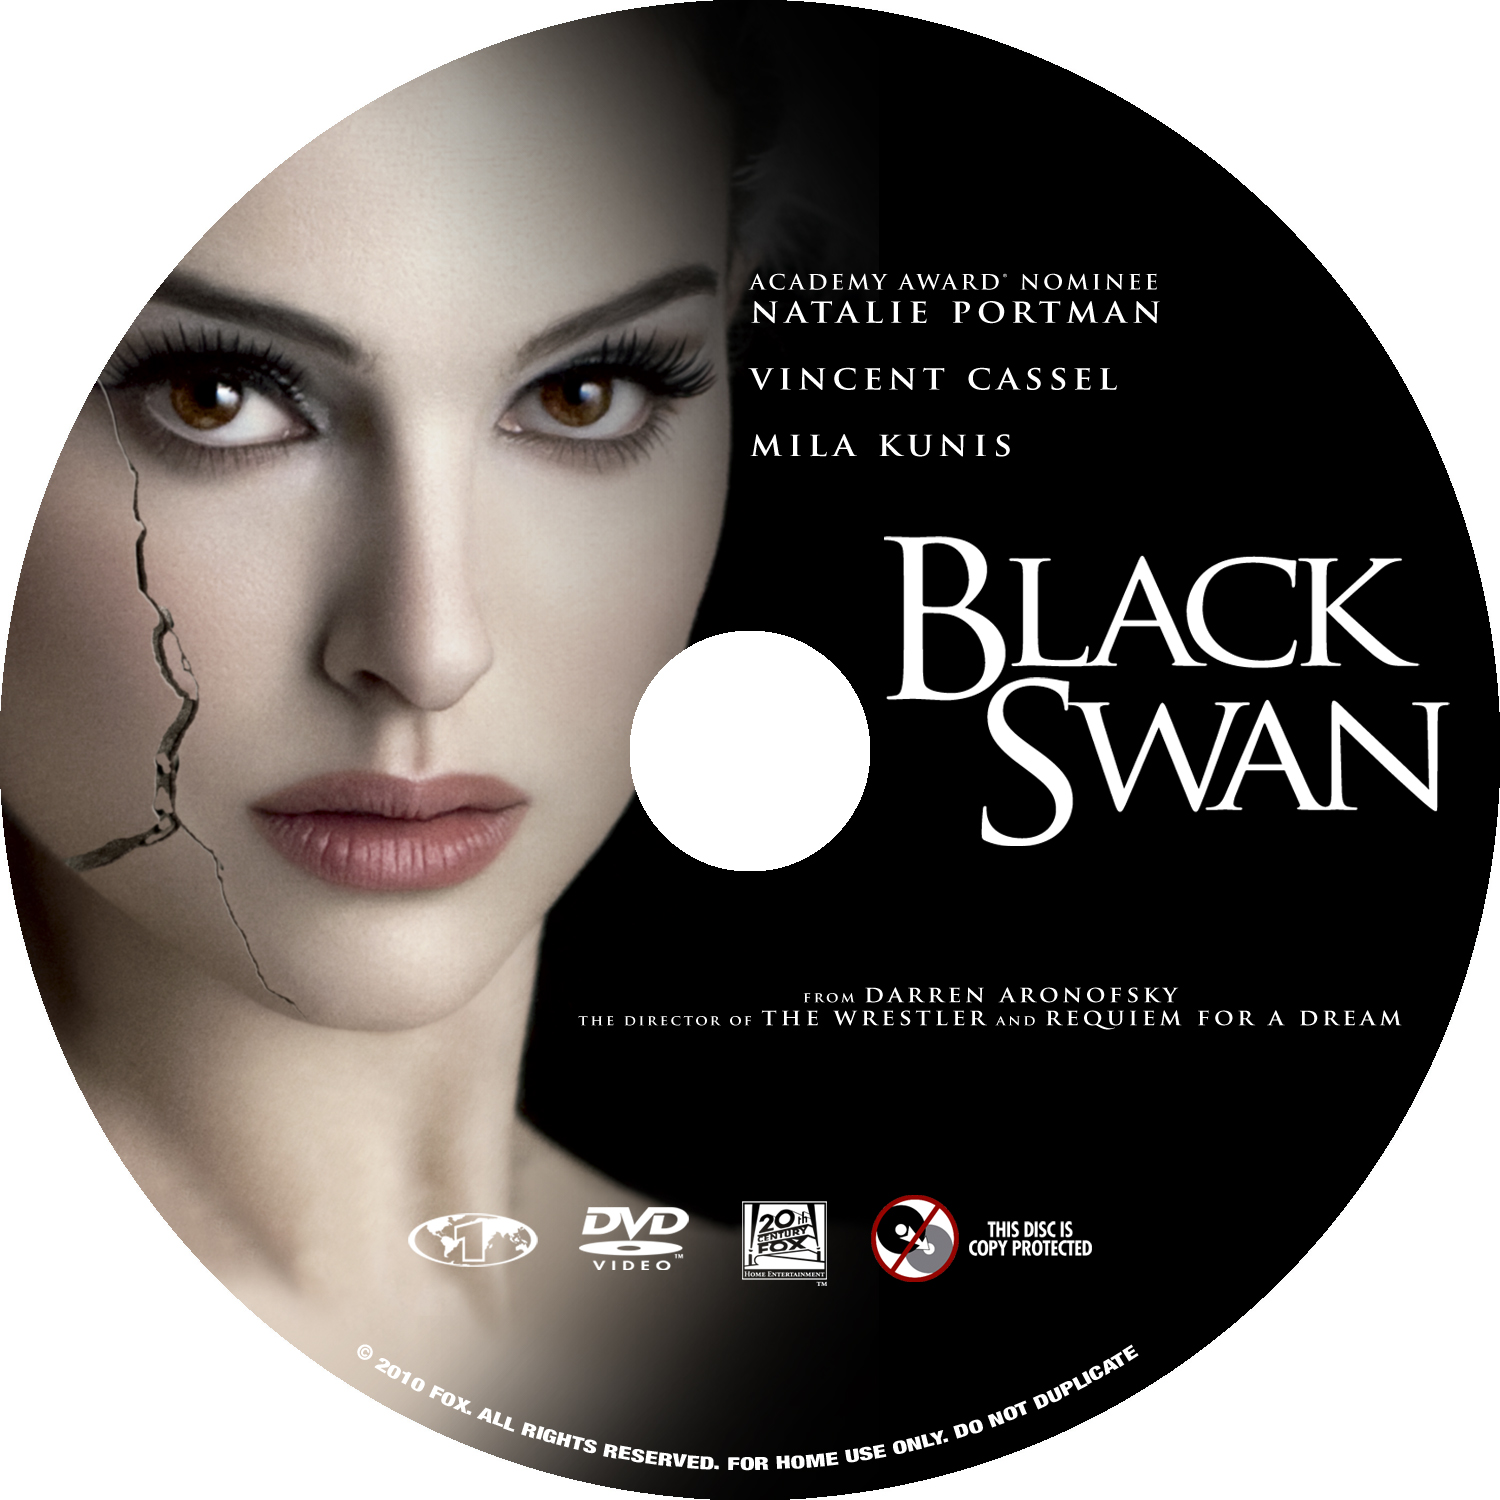 DVD COVERS LABELS: Swan